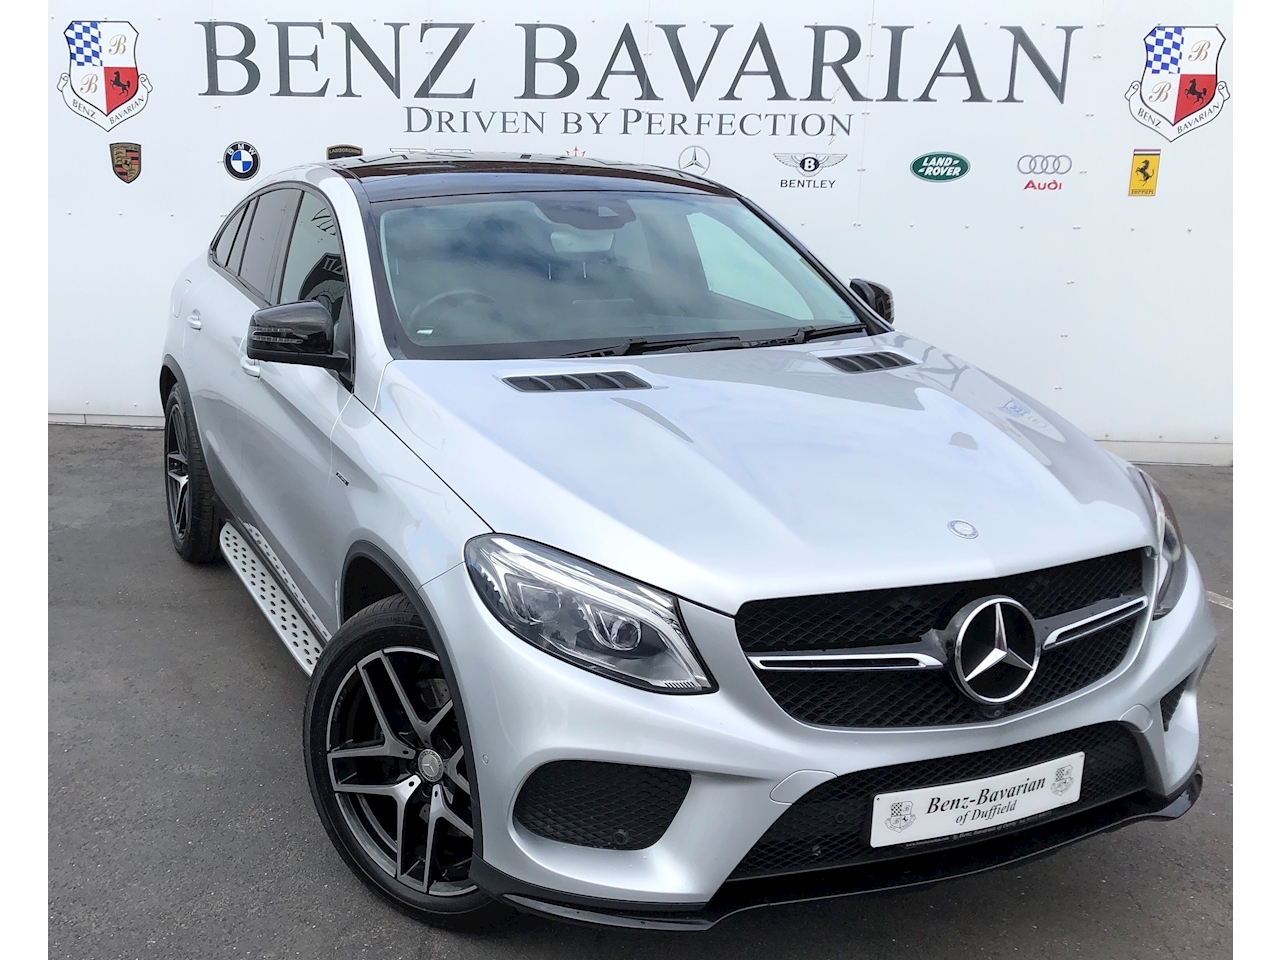 3.0 GLE450 V6 AMG (Premium) Coupe 5dr Petrol G-Tronic 4MATIC (s/s) (367 ps)